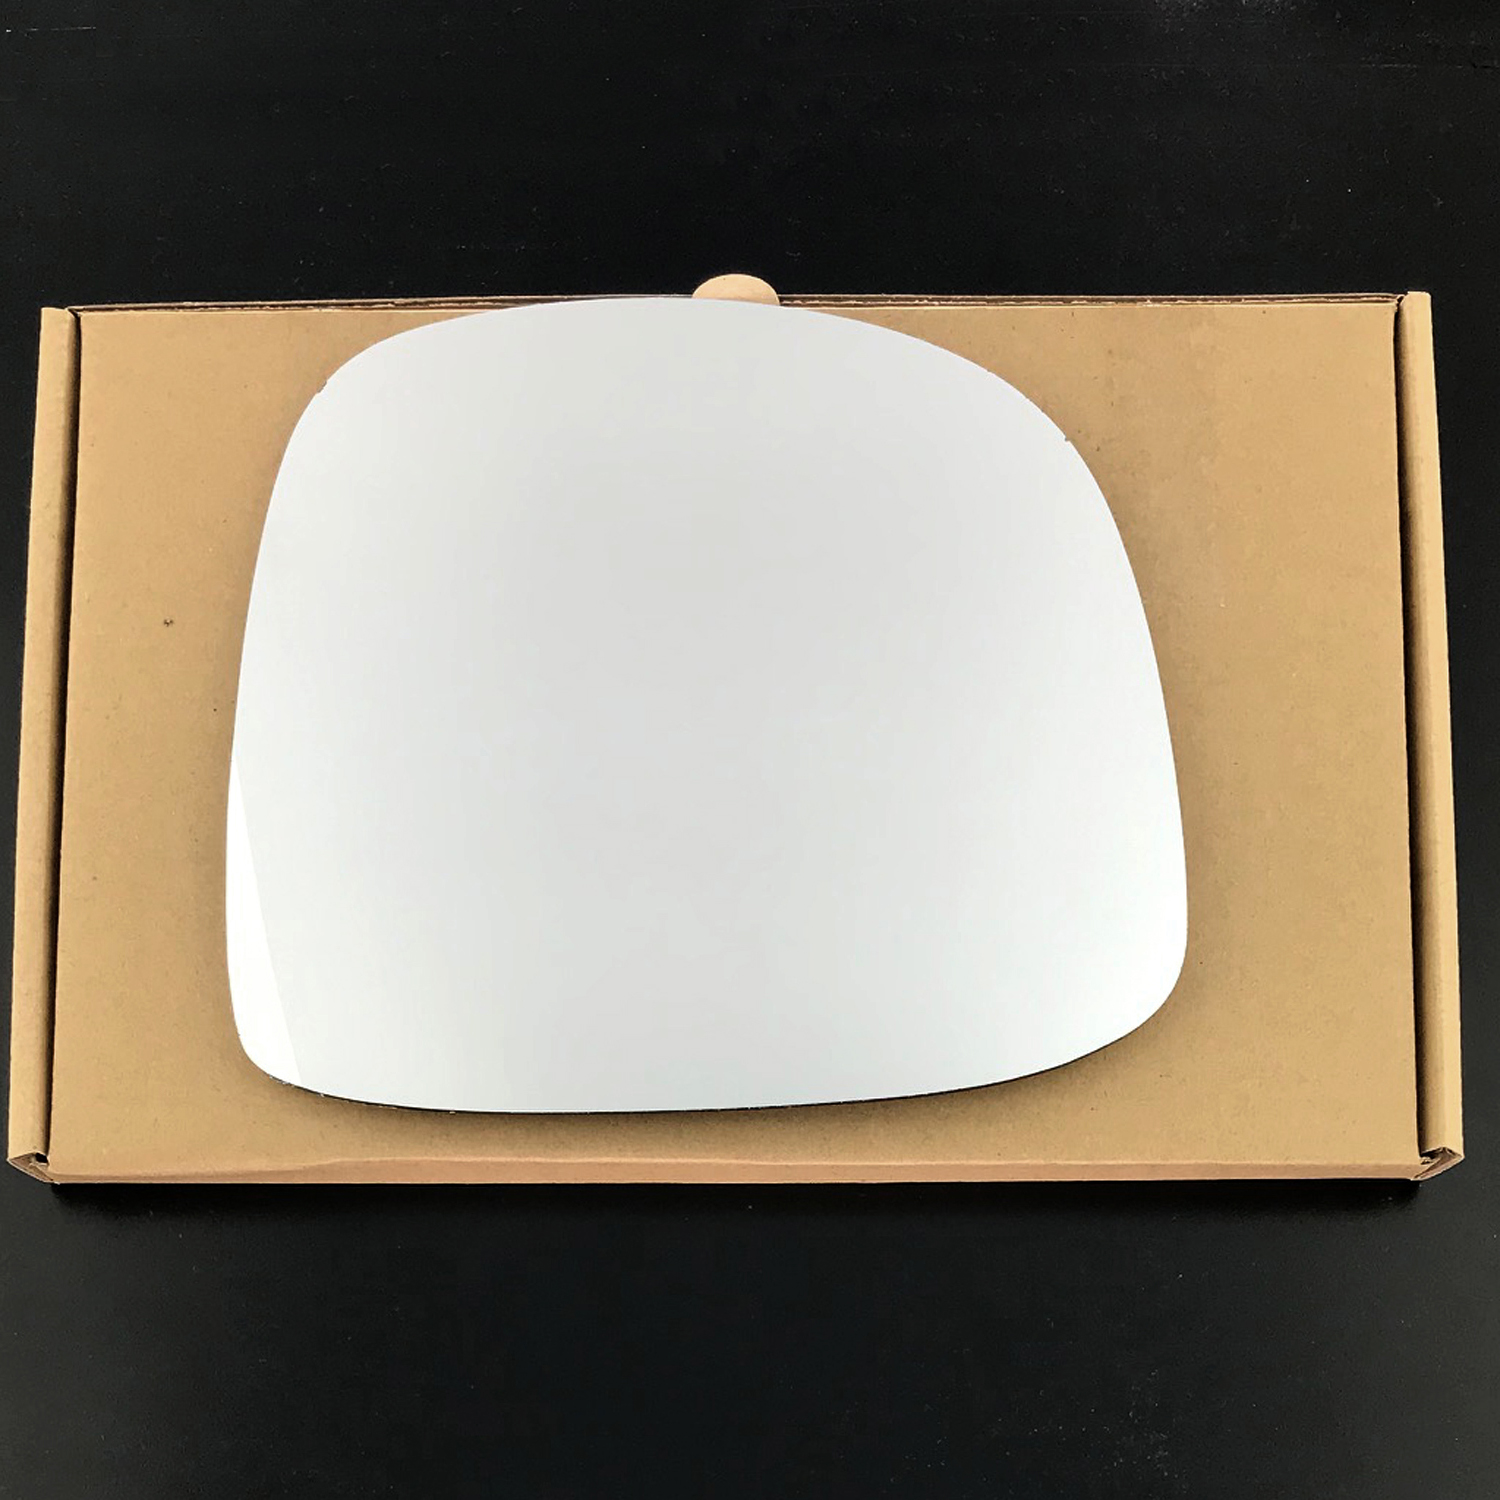 Mercedes Vito Wing Mirror Glass LEFT HAND ( UK Passenger Side ) 2004 to 2010 – Convex Wing Mirror